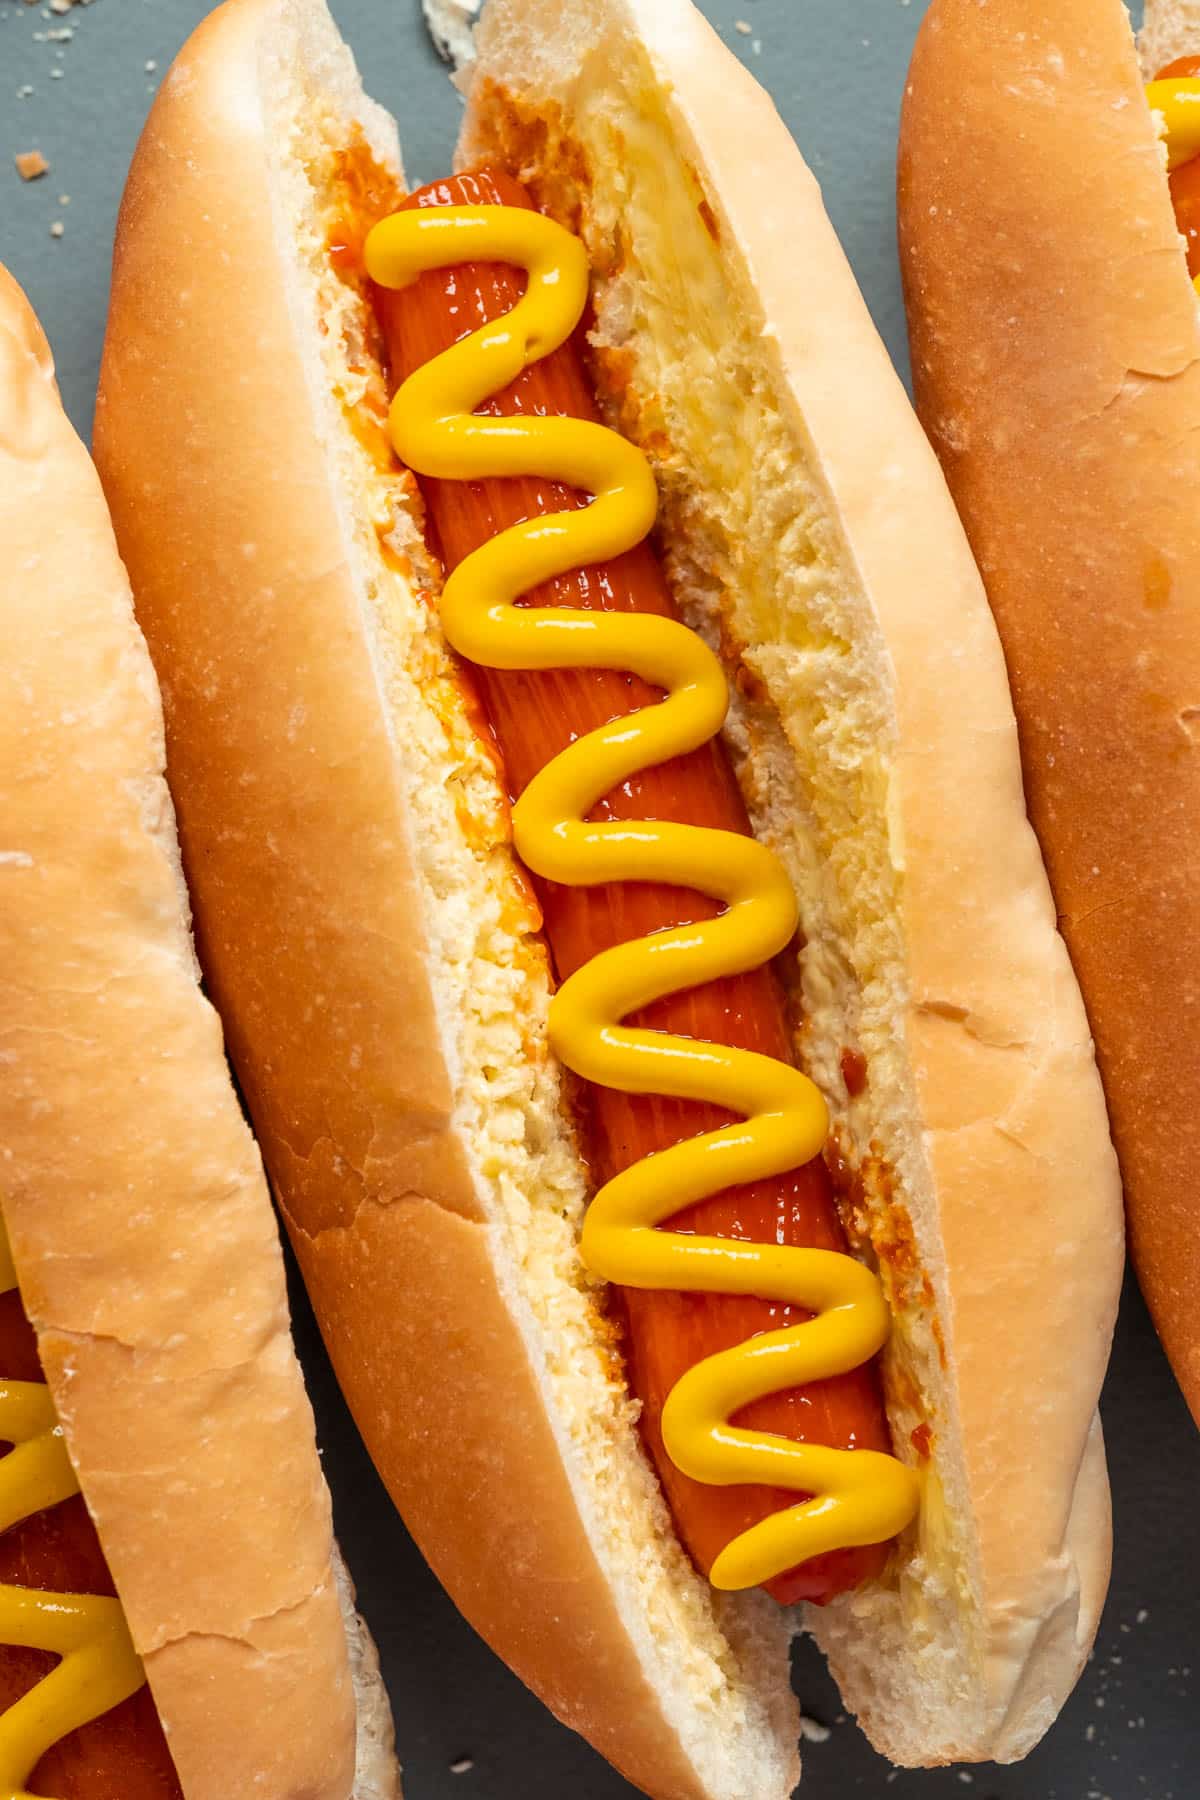 Carrot dogs with mustard on a gray plate.